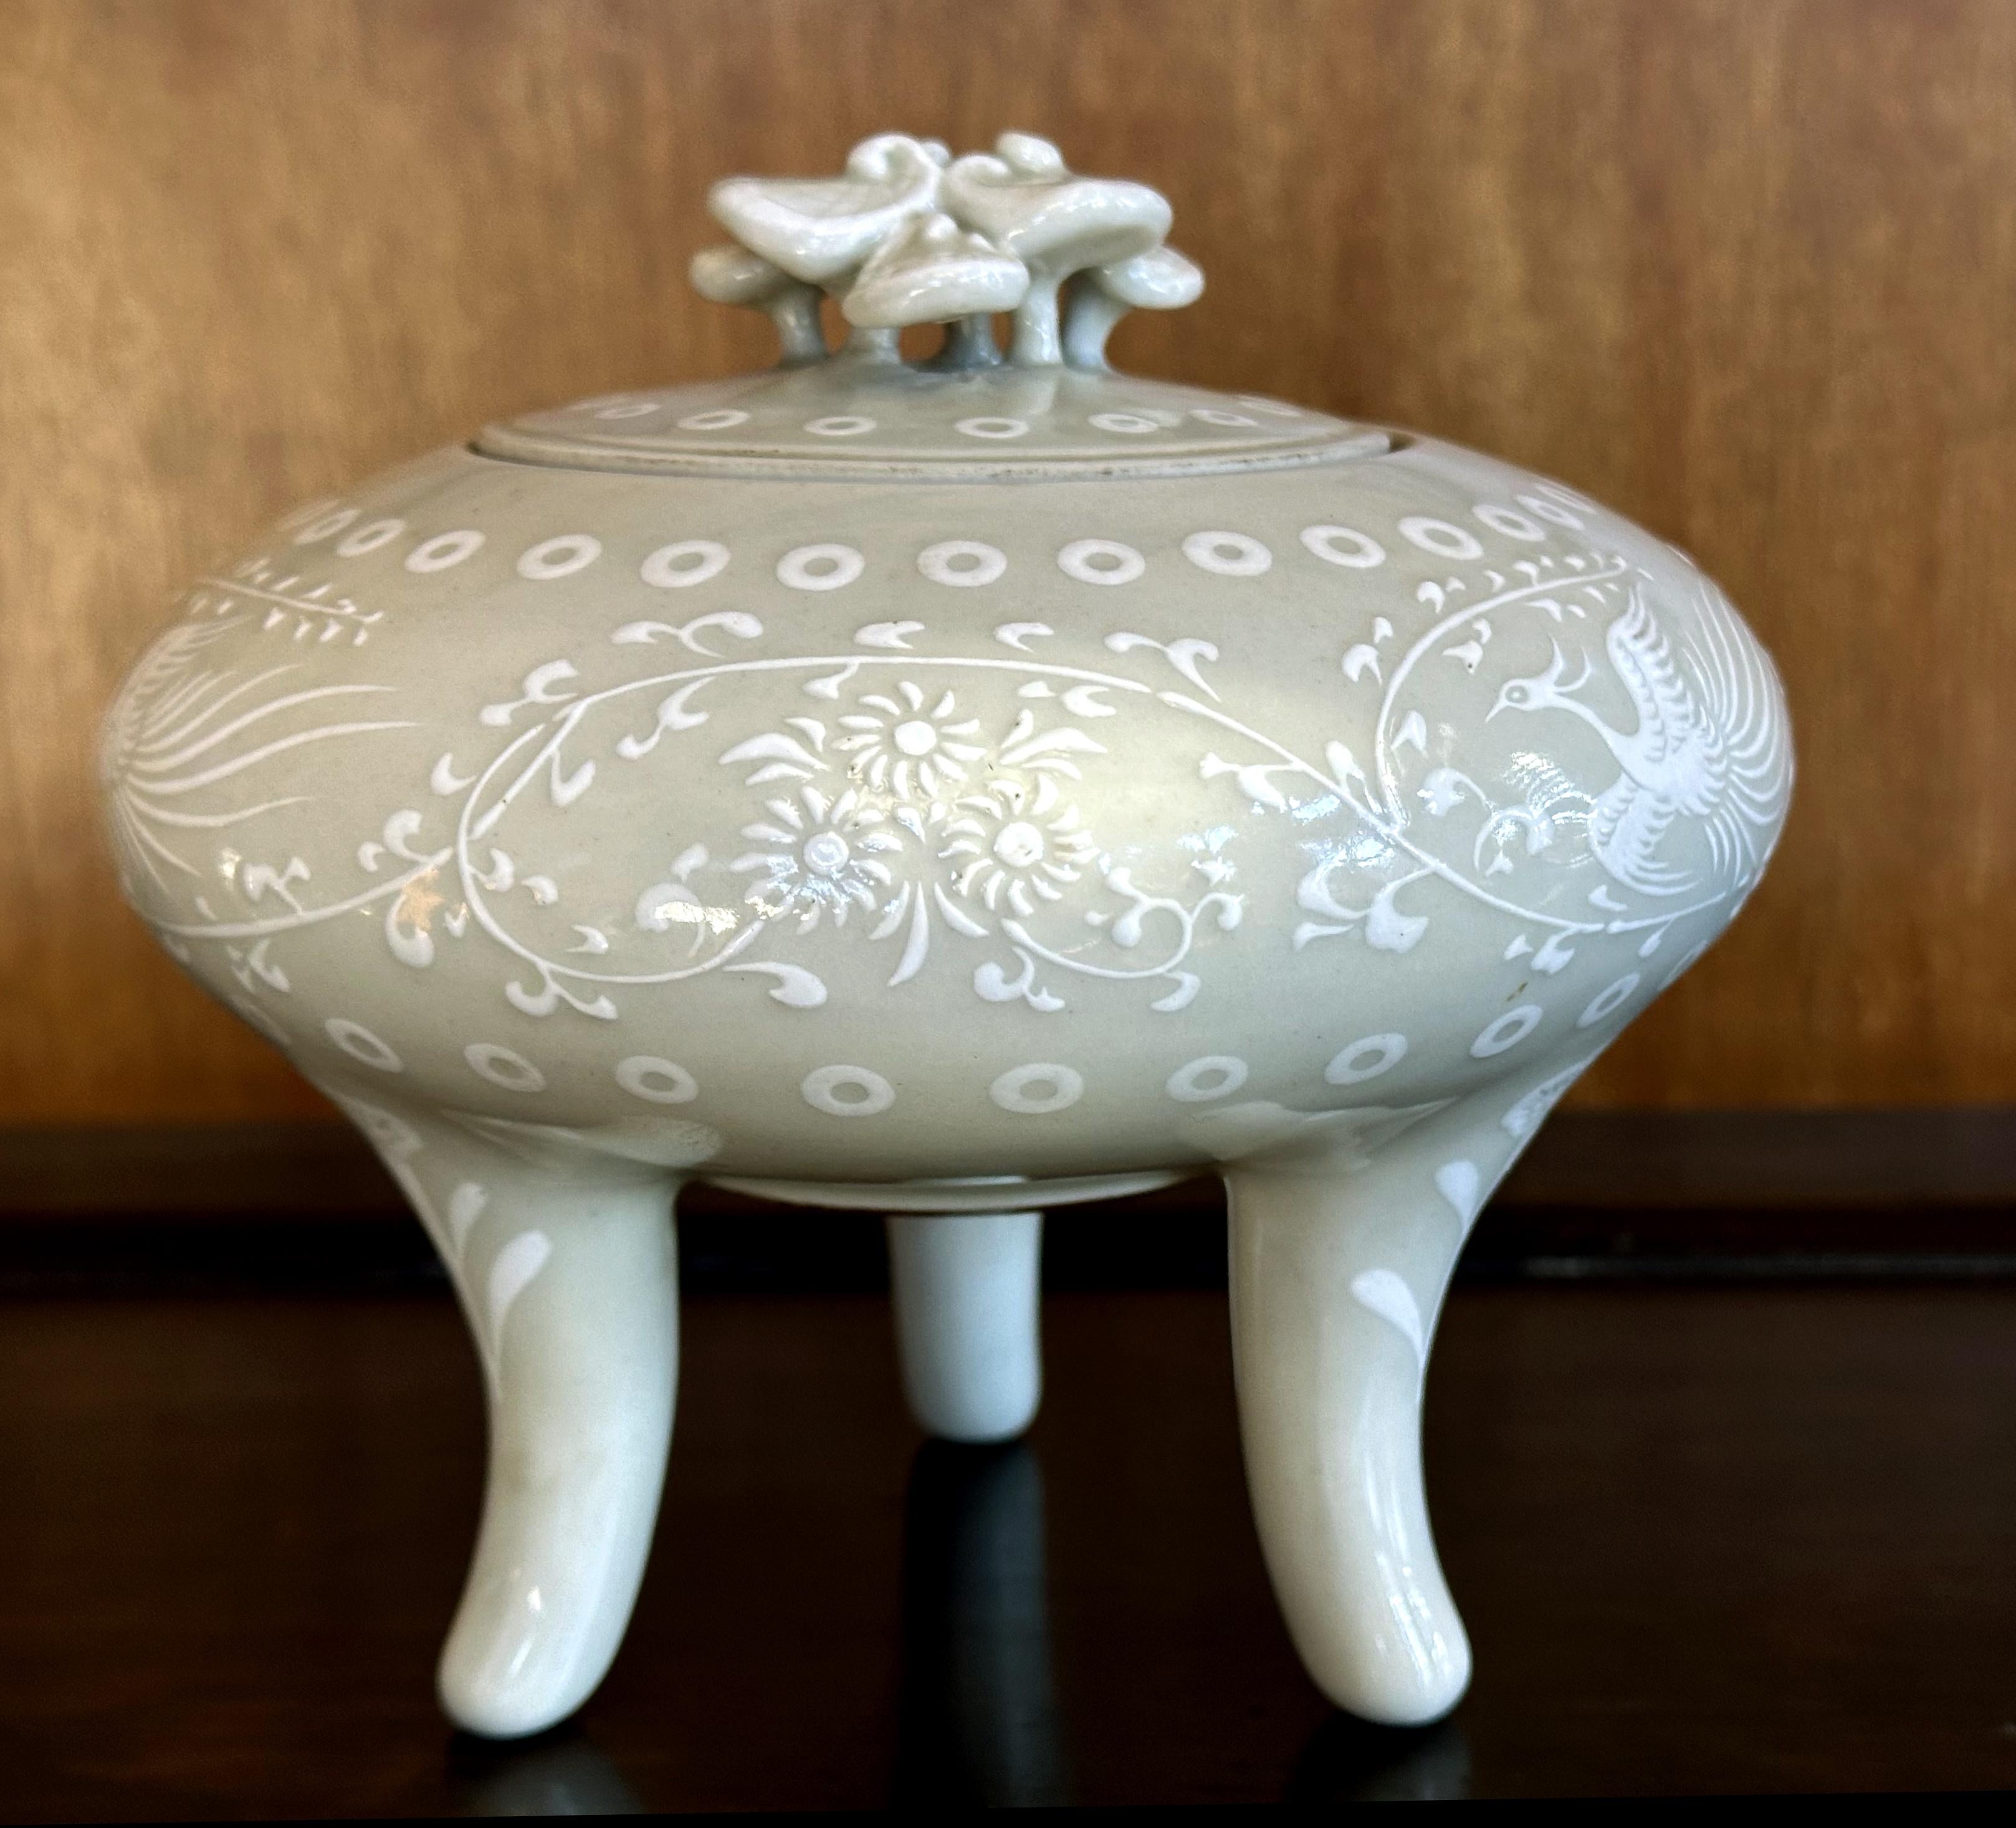 A porcelain incense burner (koro) made by Japanese potter Makuzu Kozan (also known as Miyagawa Kozan, 1842-1916) circa 1890s-1900s (end of Meiji Period). The koro features an elegant shape with a compressed rounded body supported by three long